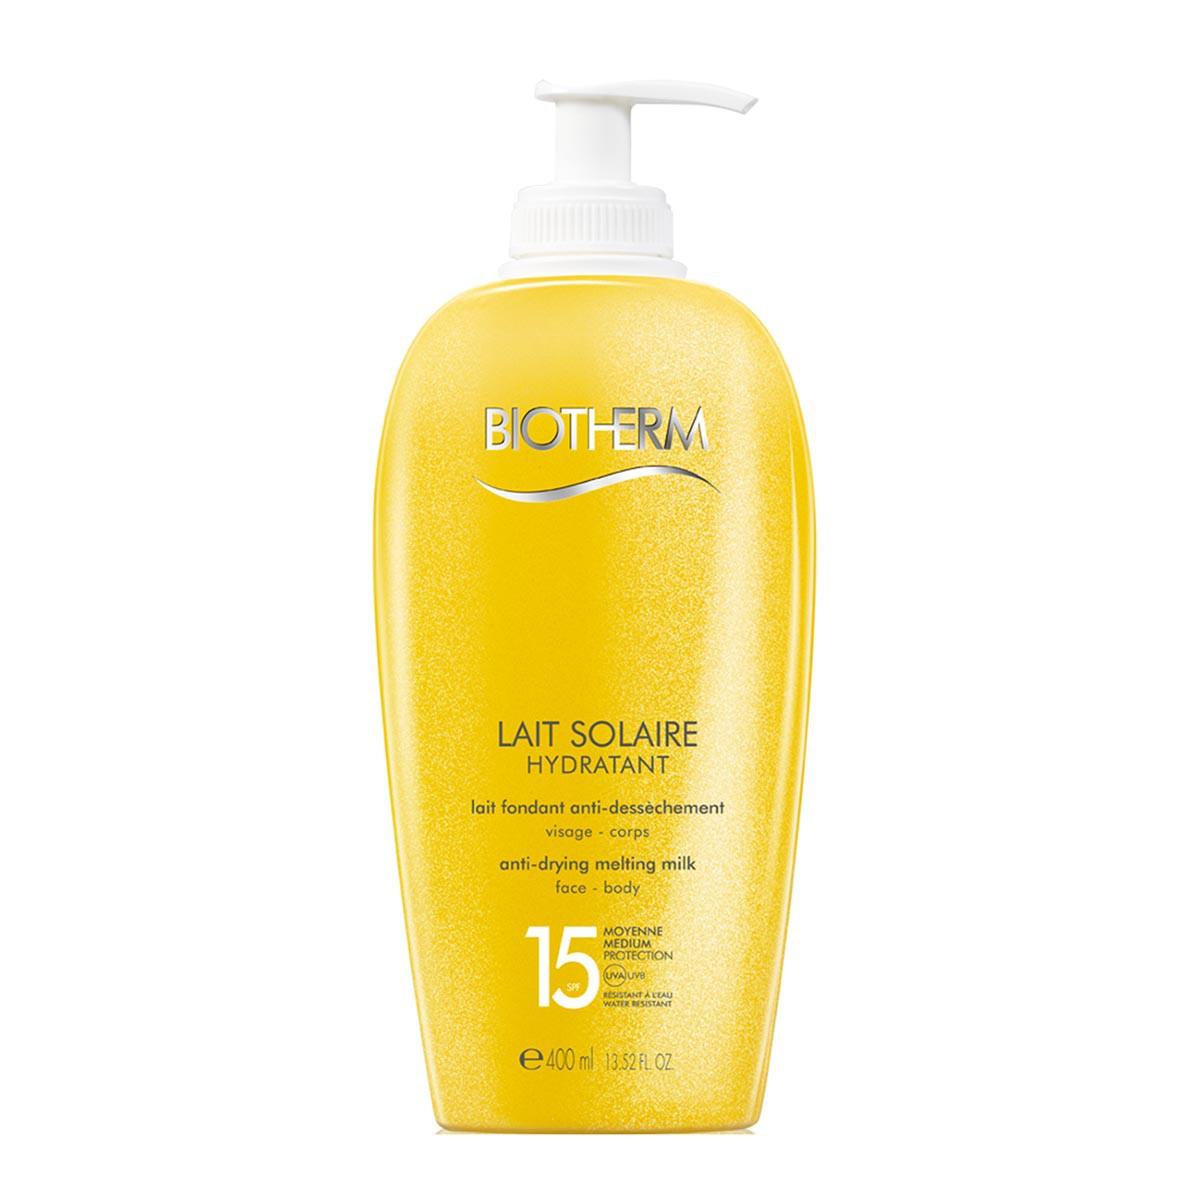 biotherm-lait-solaire-hydratant-spf15-400ml-protector